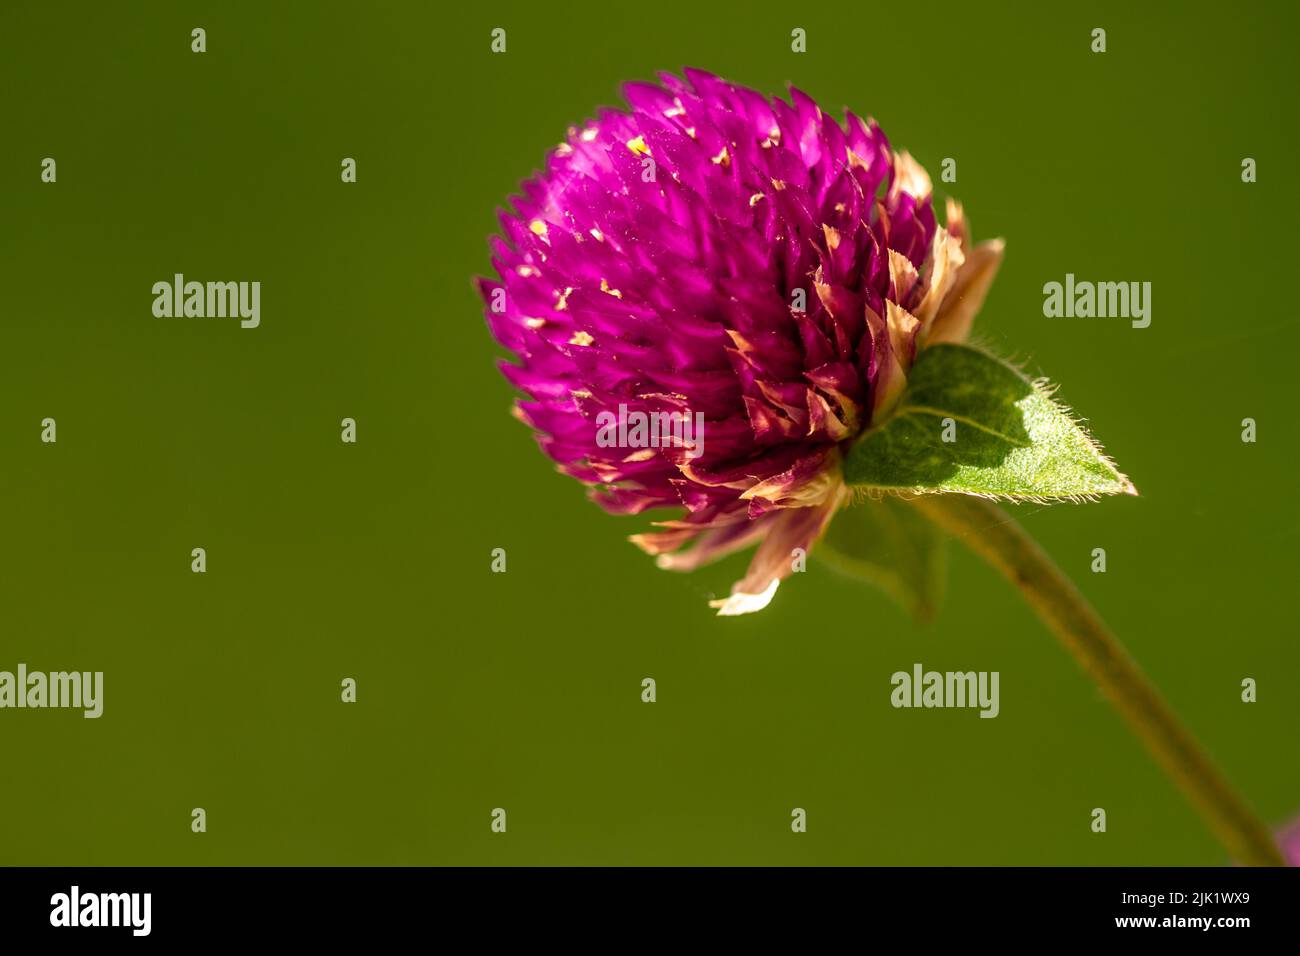 Allium sphaerocephalon flowers in bloom are purple, round in shape with a blurry green foliage background Stock Photo